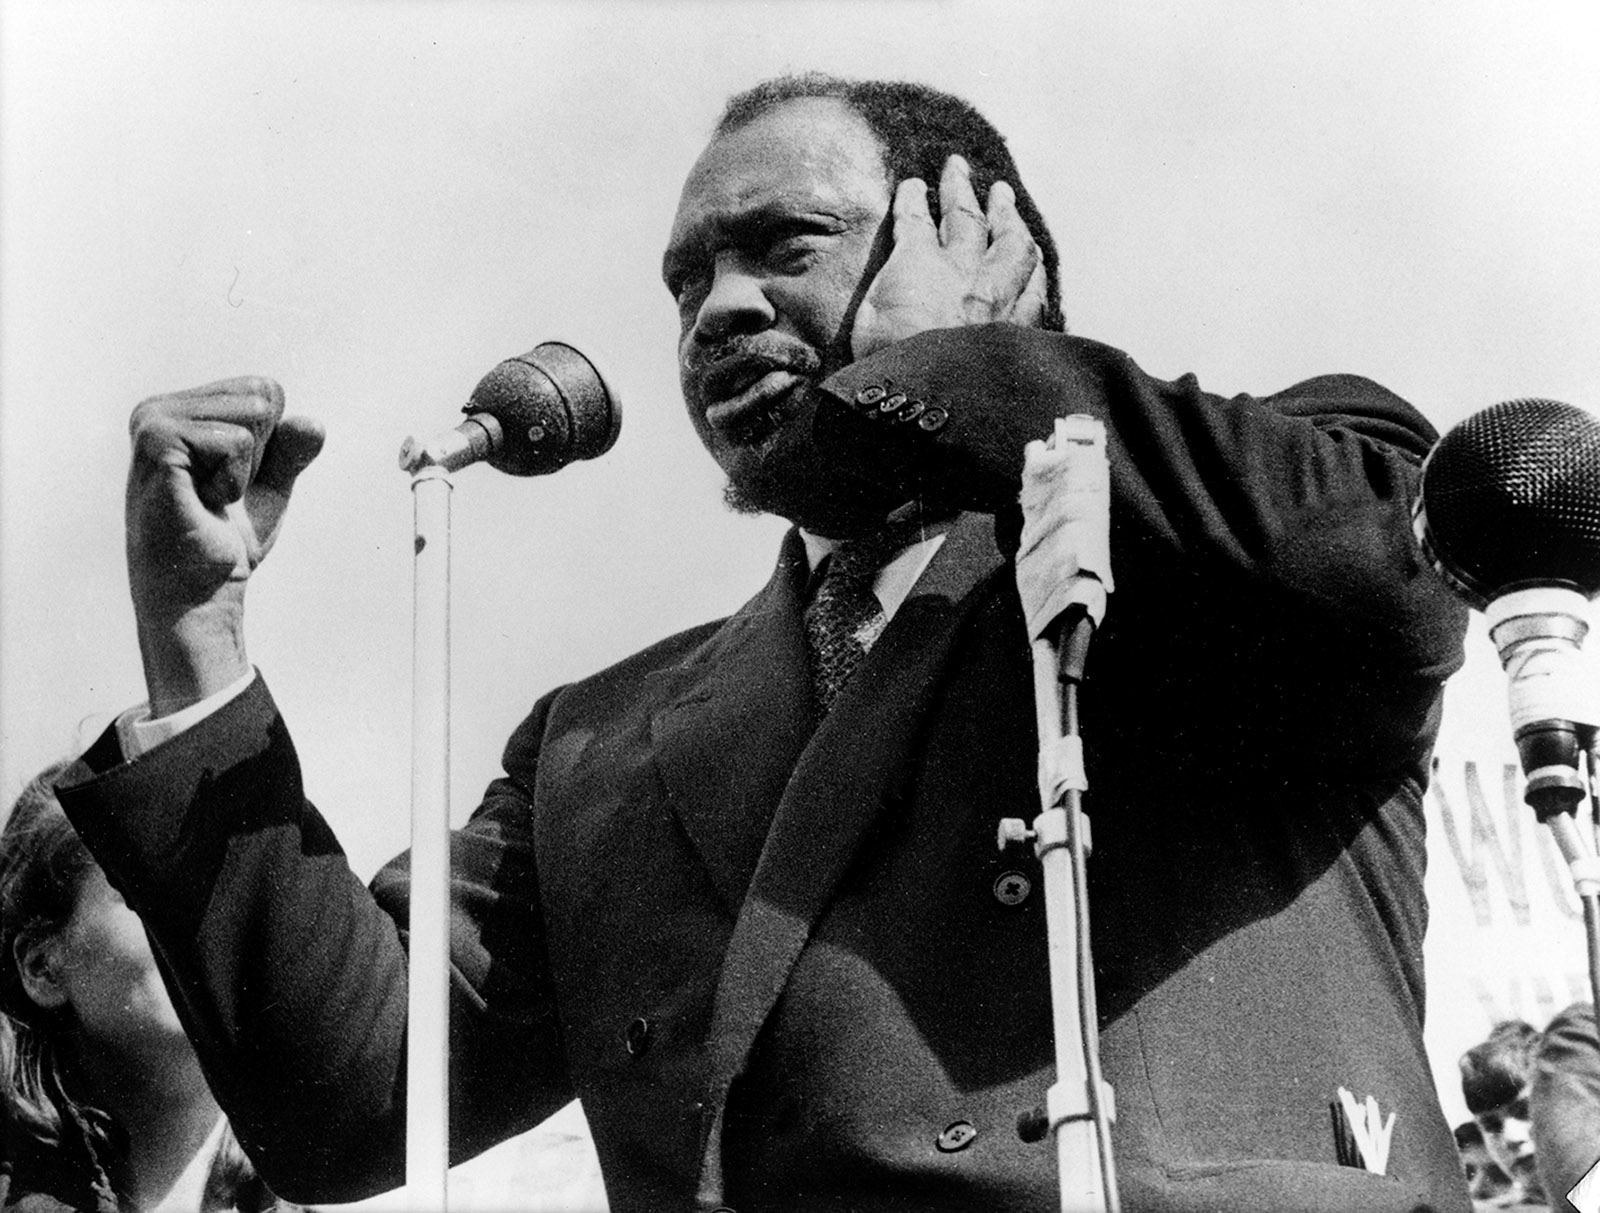 Remembering Paul Robeson